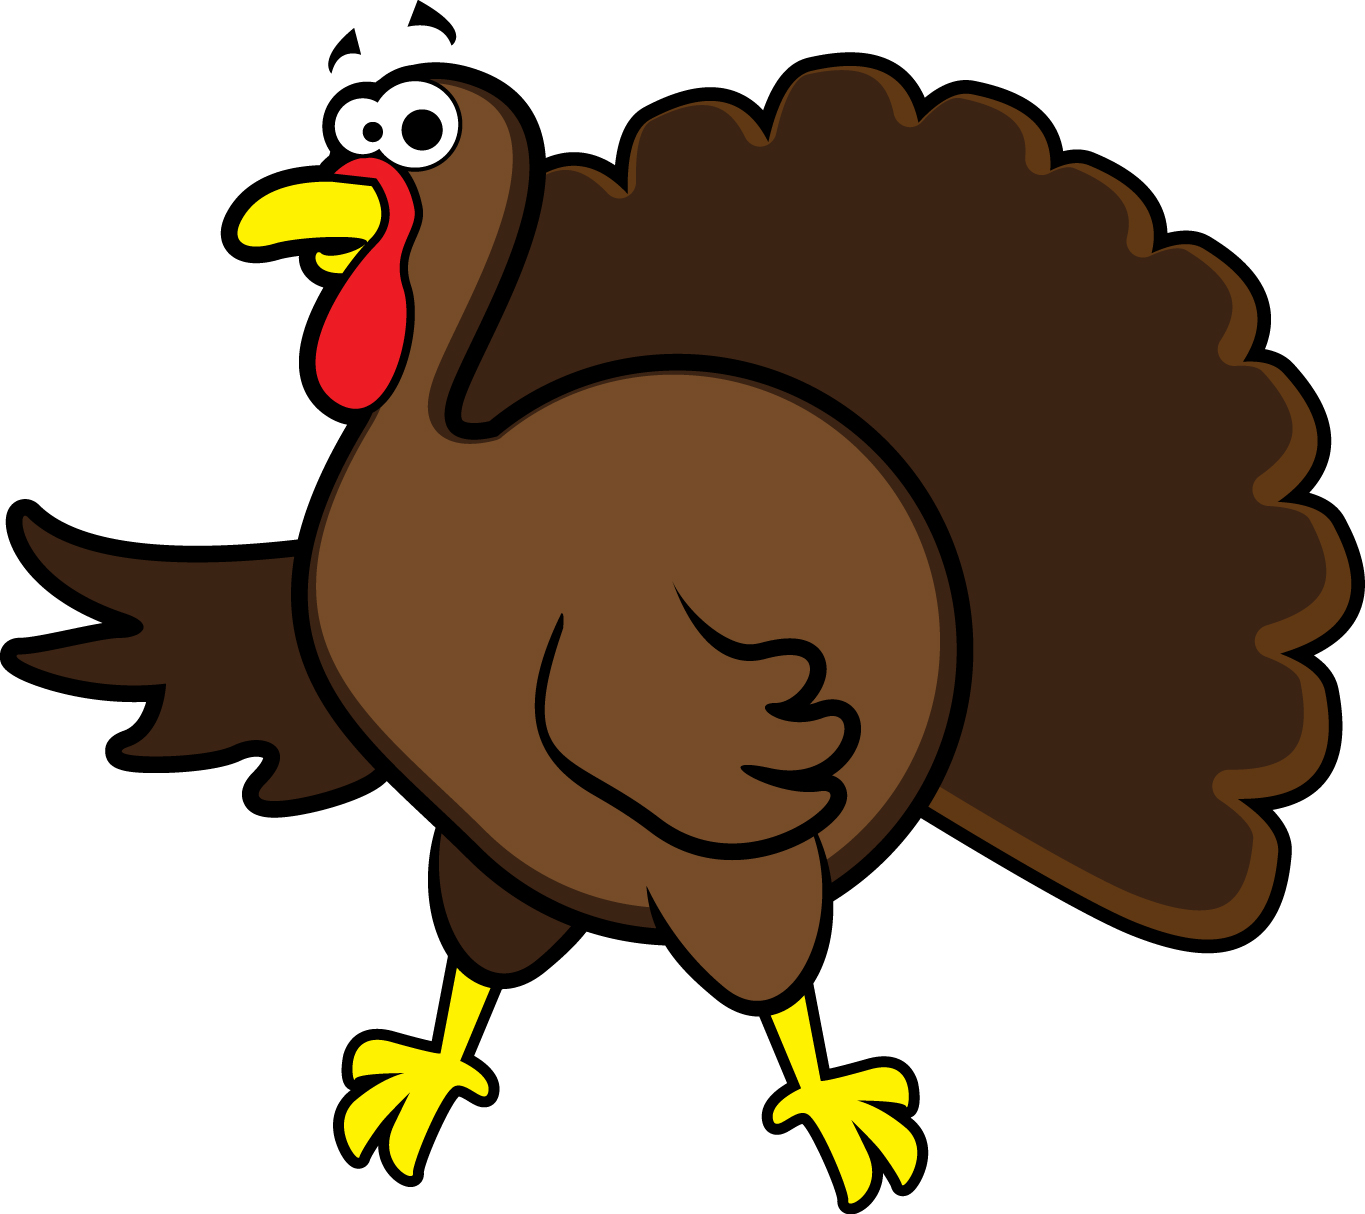 Turkey download free holiday vectors clipart clipart